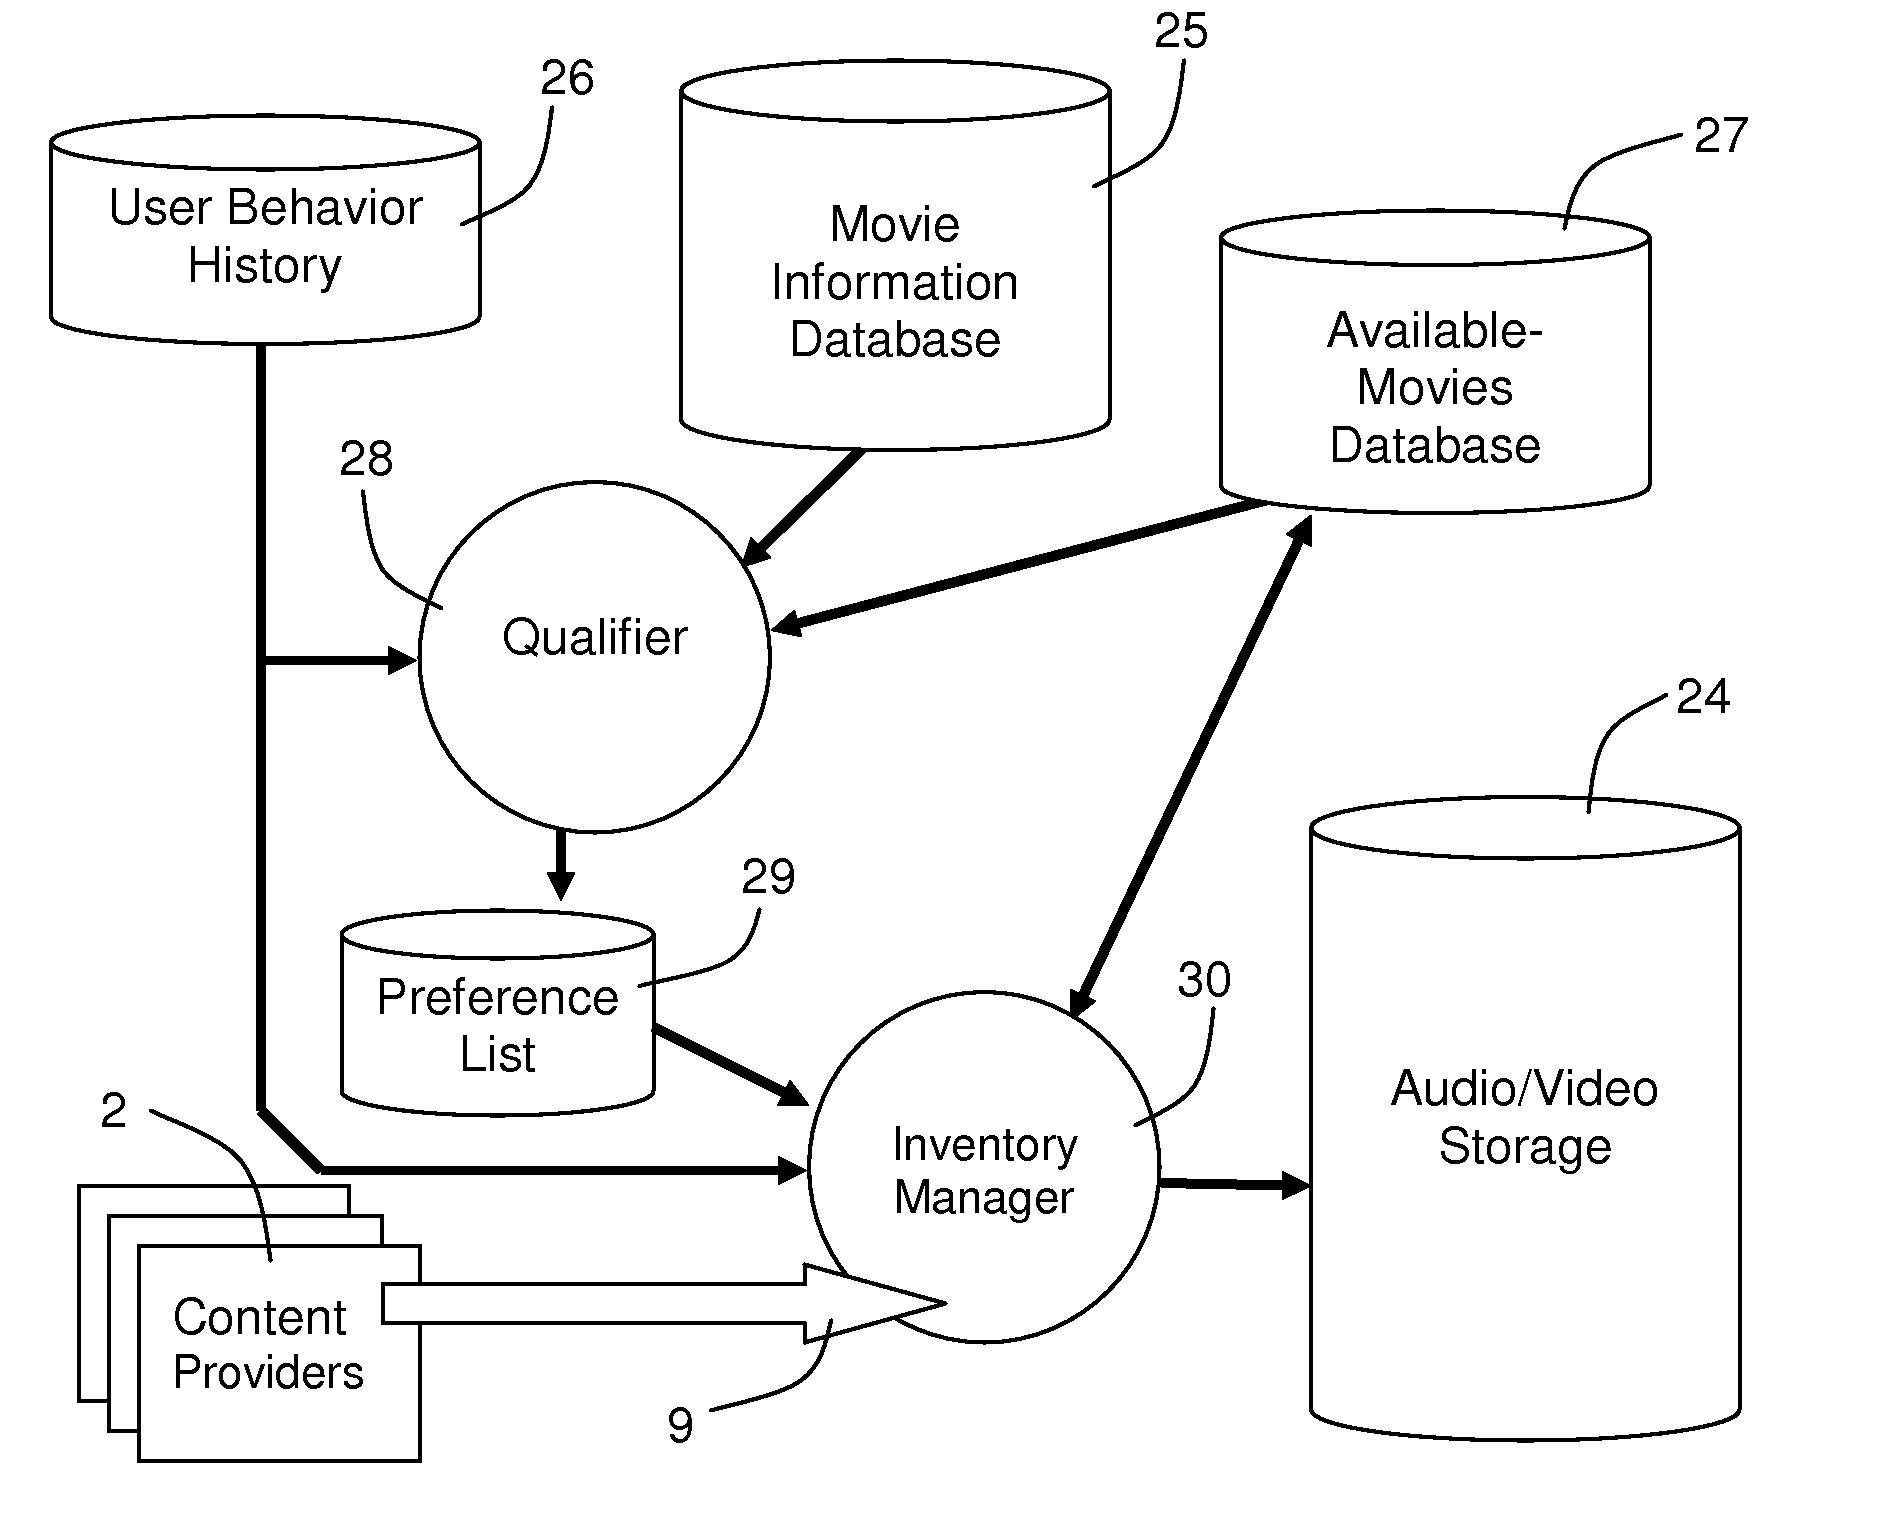 Virtual Store Management Method and System for Operating an Interactive Audio/Video Entertainment System According to Viewers Tastes and Preferences